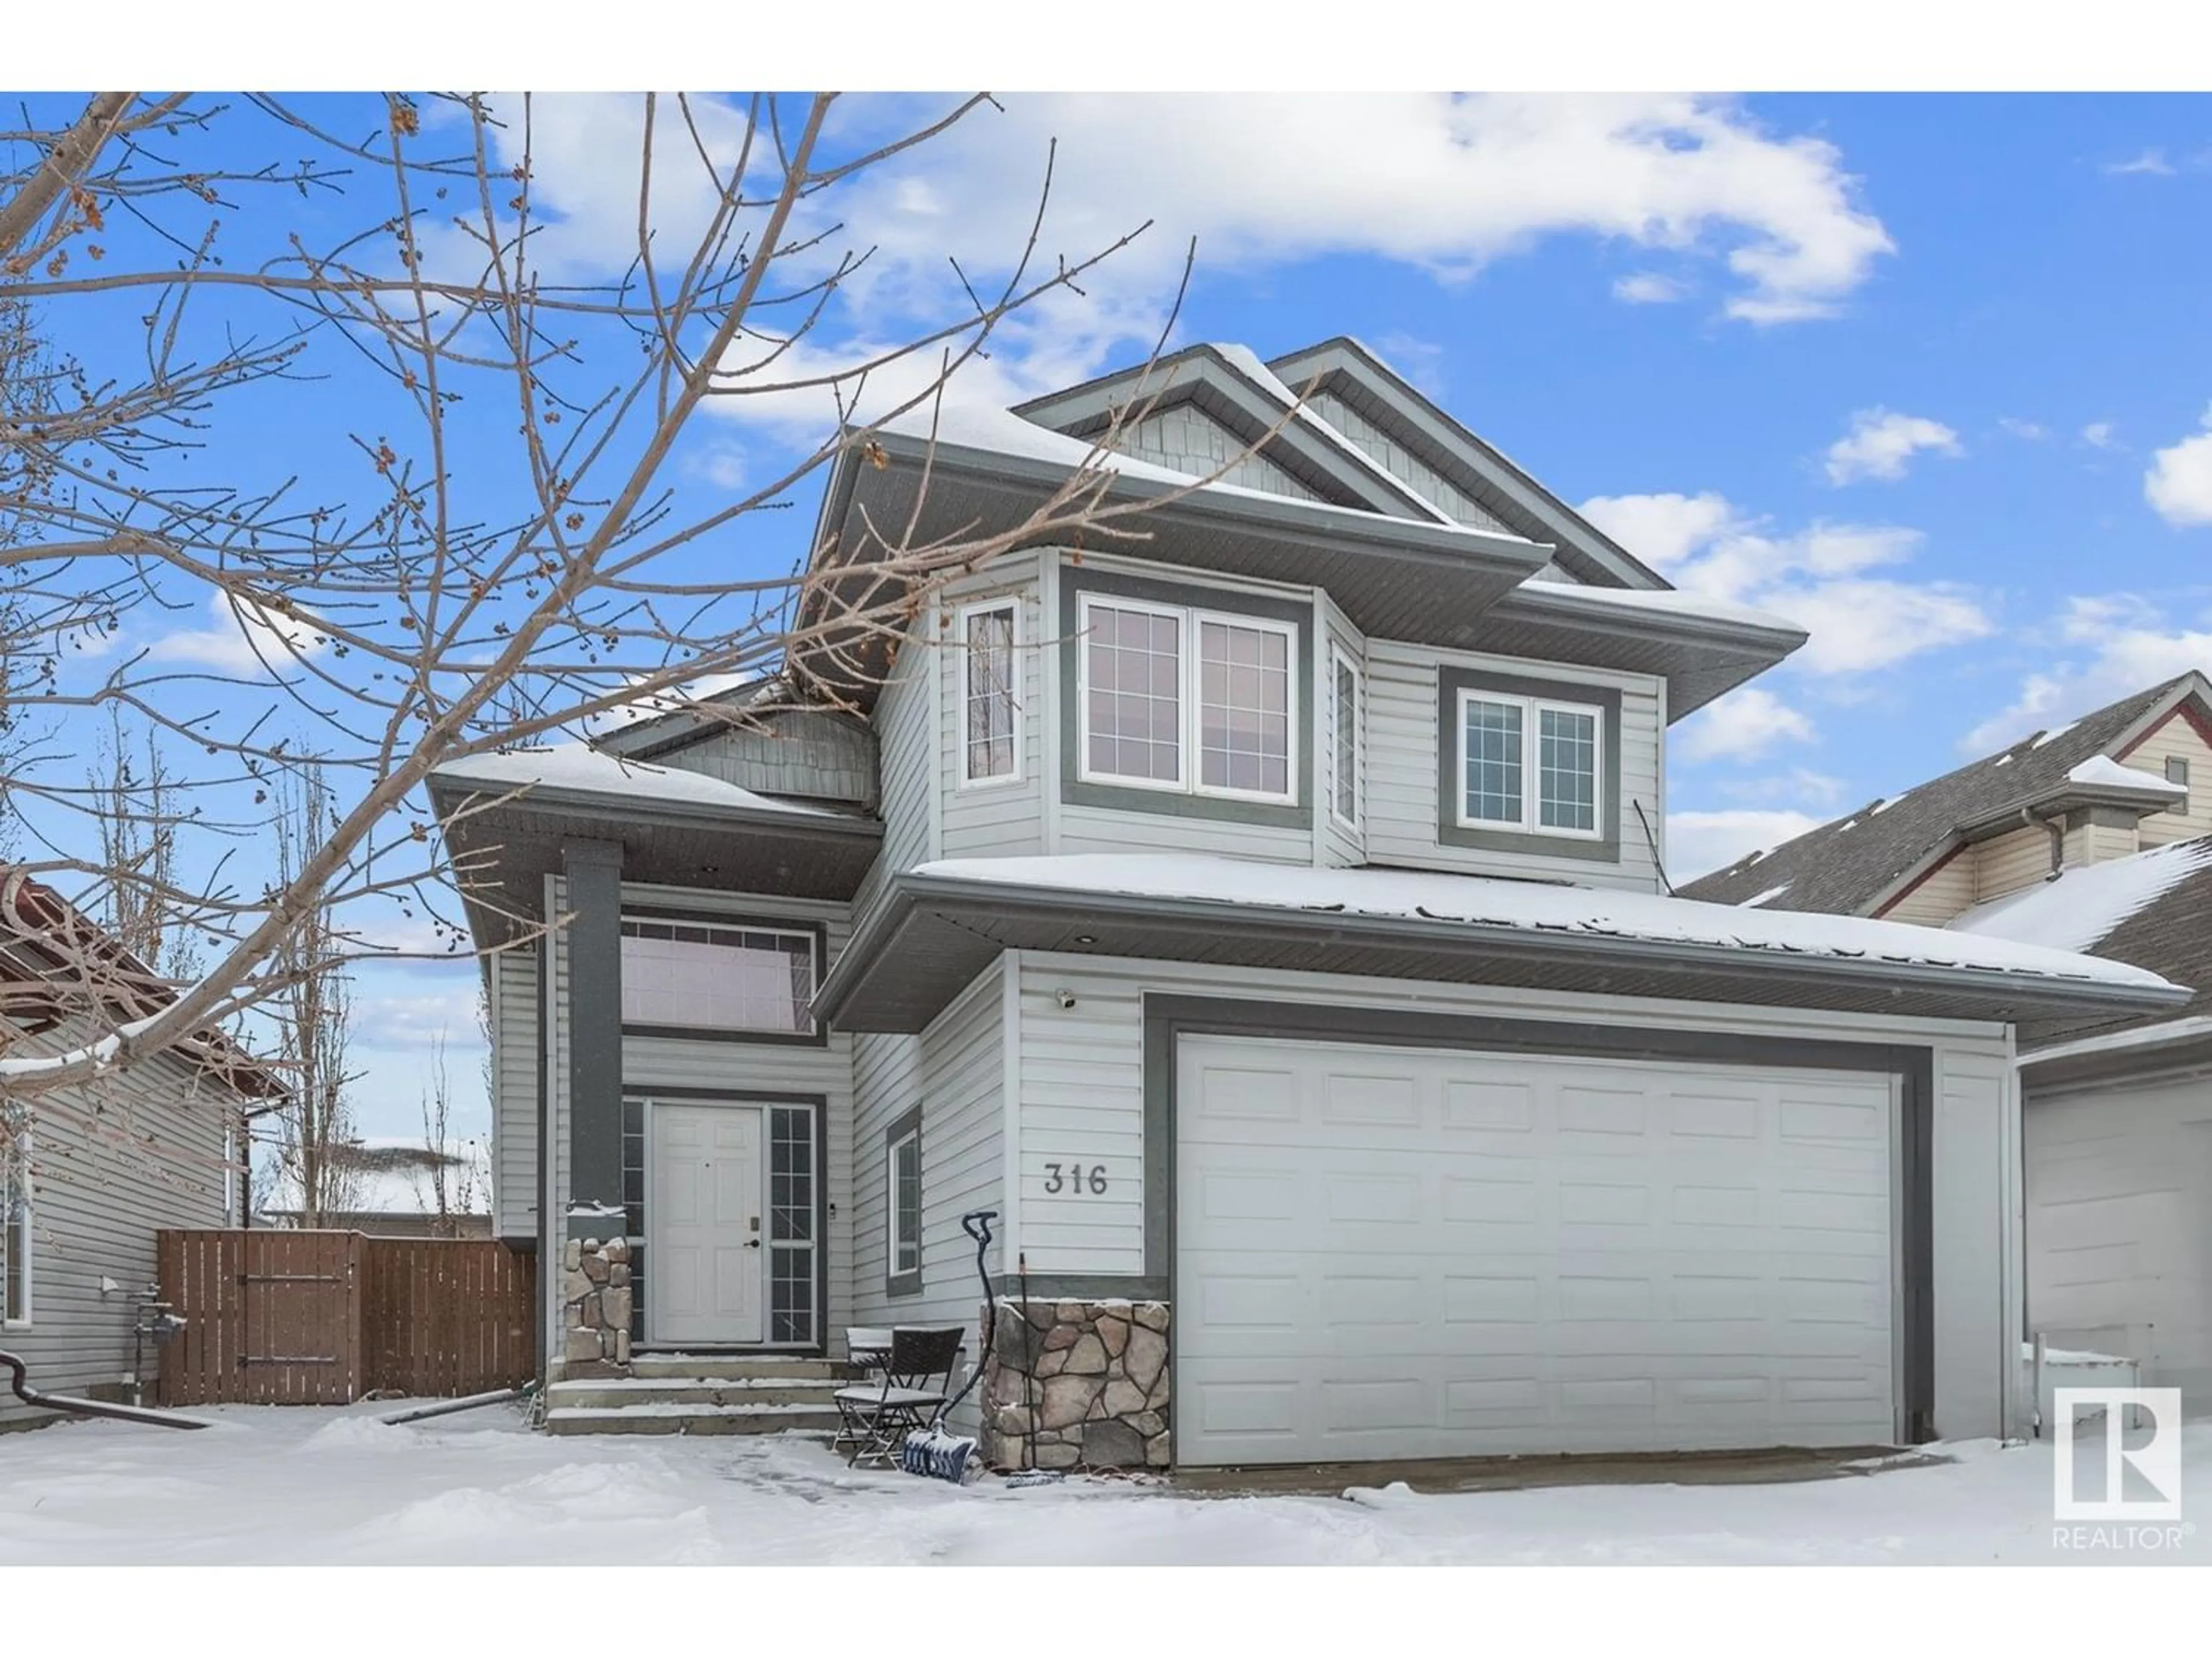 Frontside or backside of a home for 316 Wiley CR, Red Deer Alberta T4N7G6